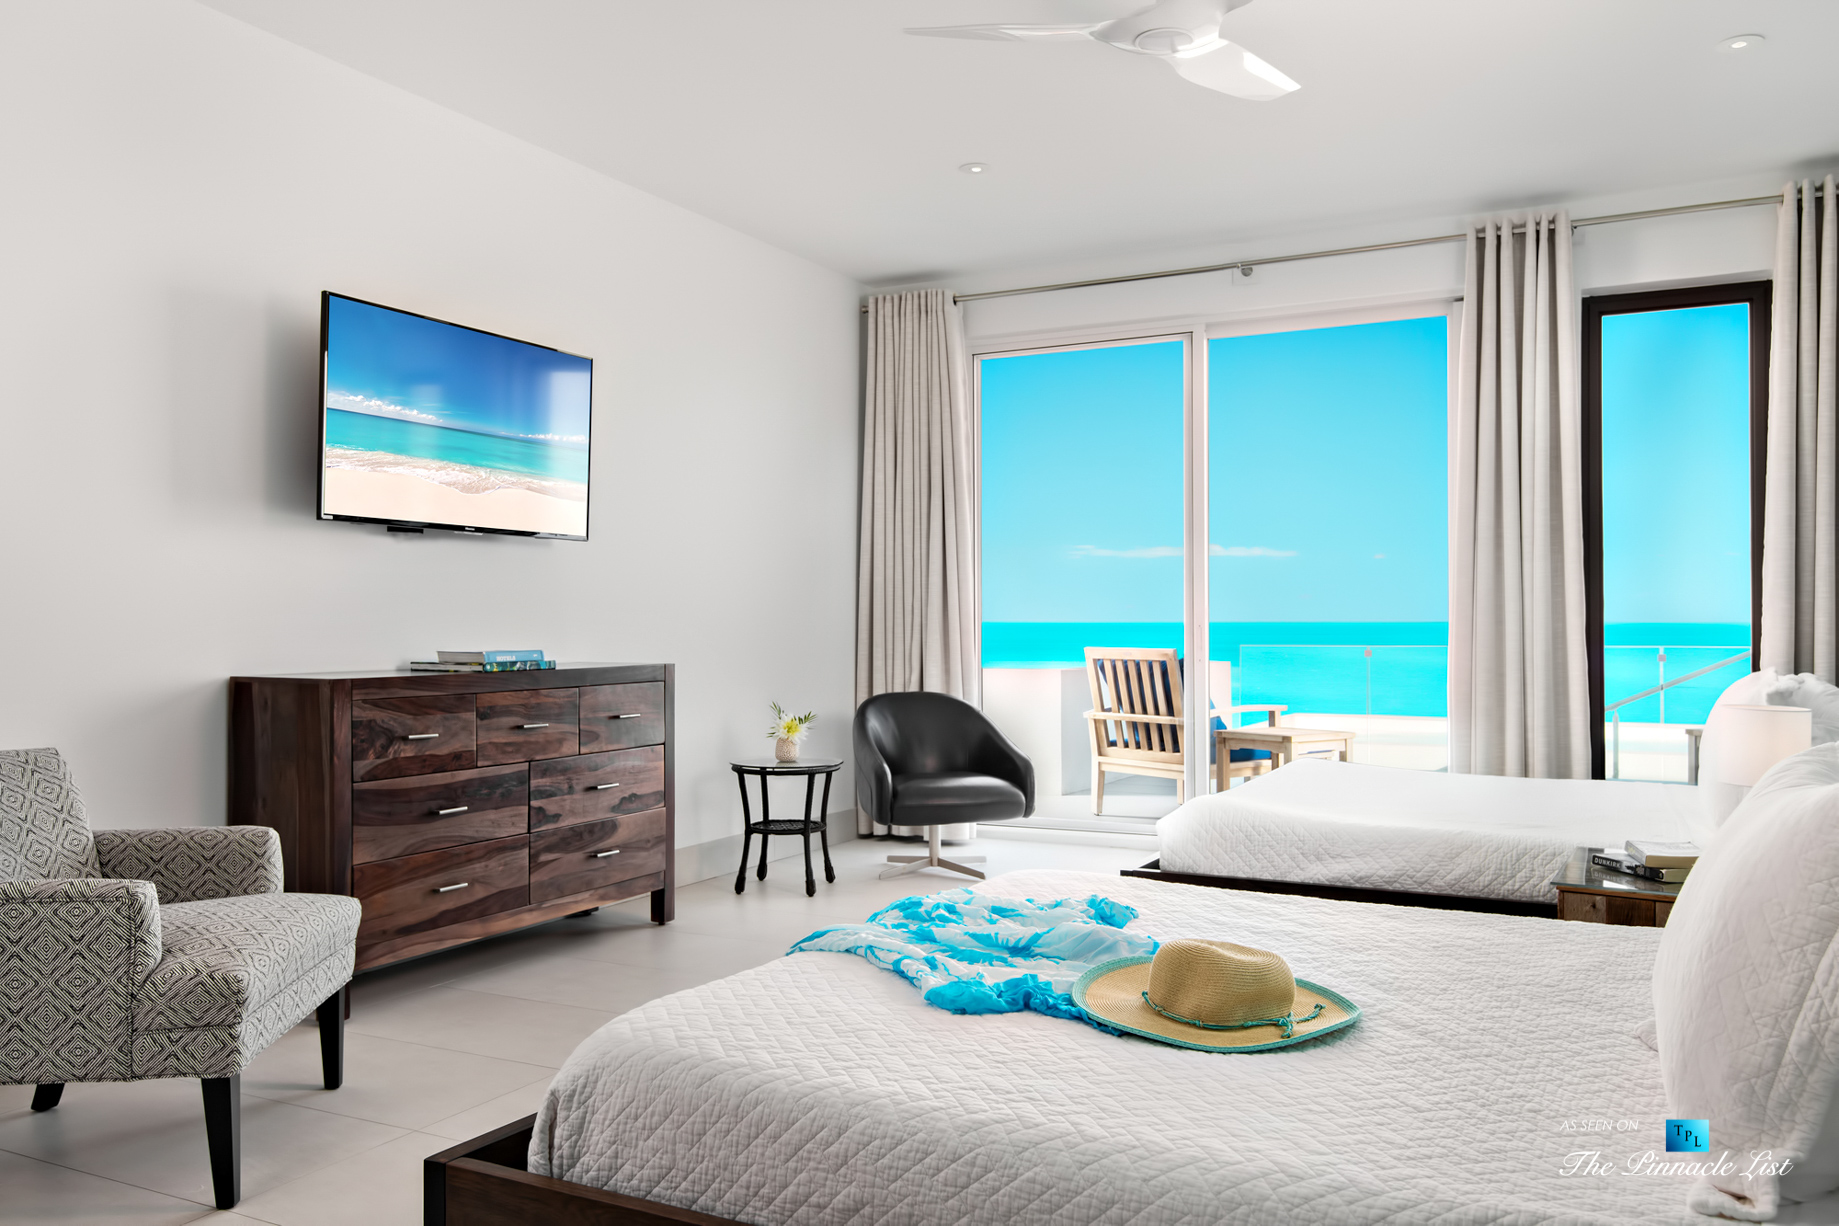 Tip of the Tail Villa – Providenciales, Turks and Caicos Islands – Caribbean House Bedroom – Luxury Real Estate – South Shore Peninsula Home